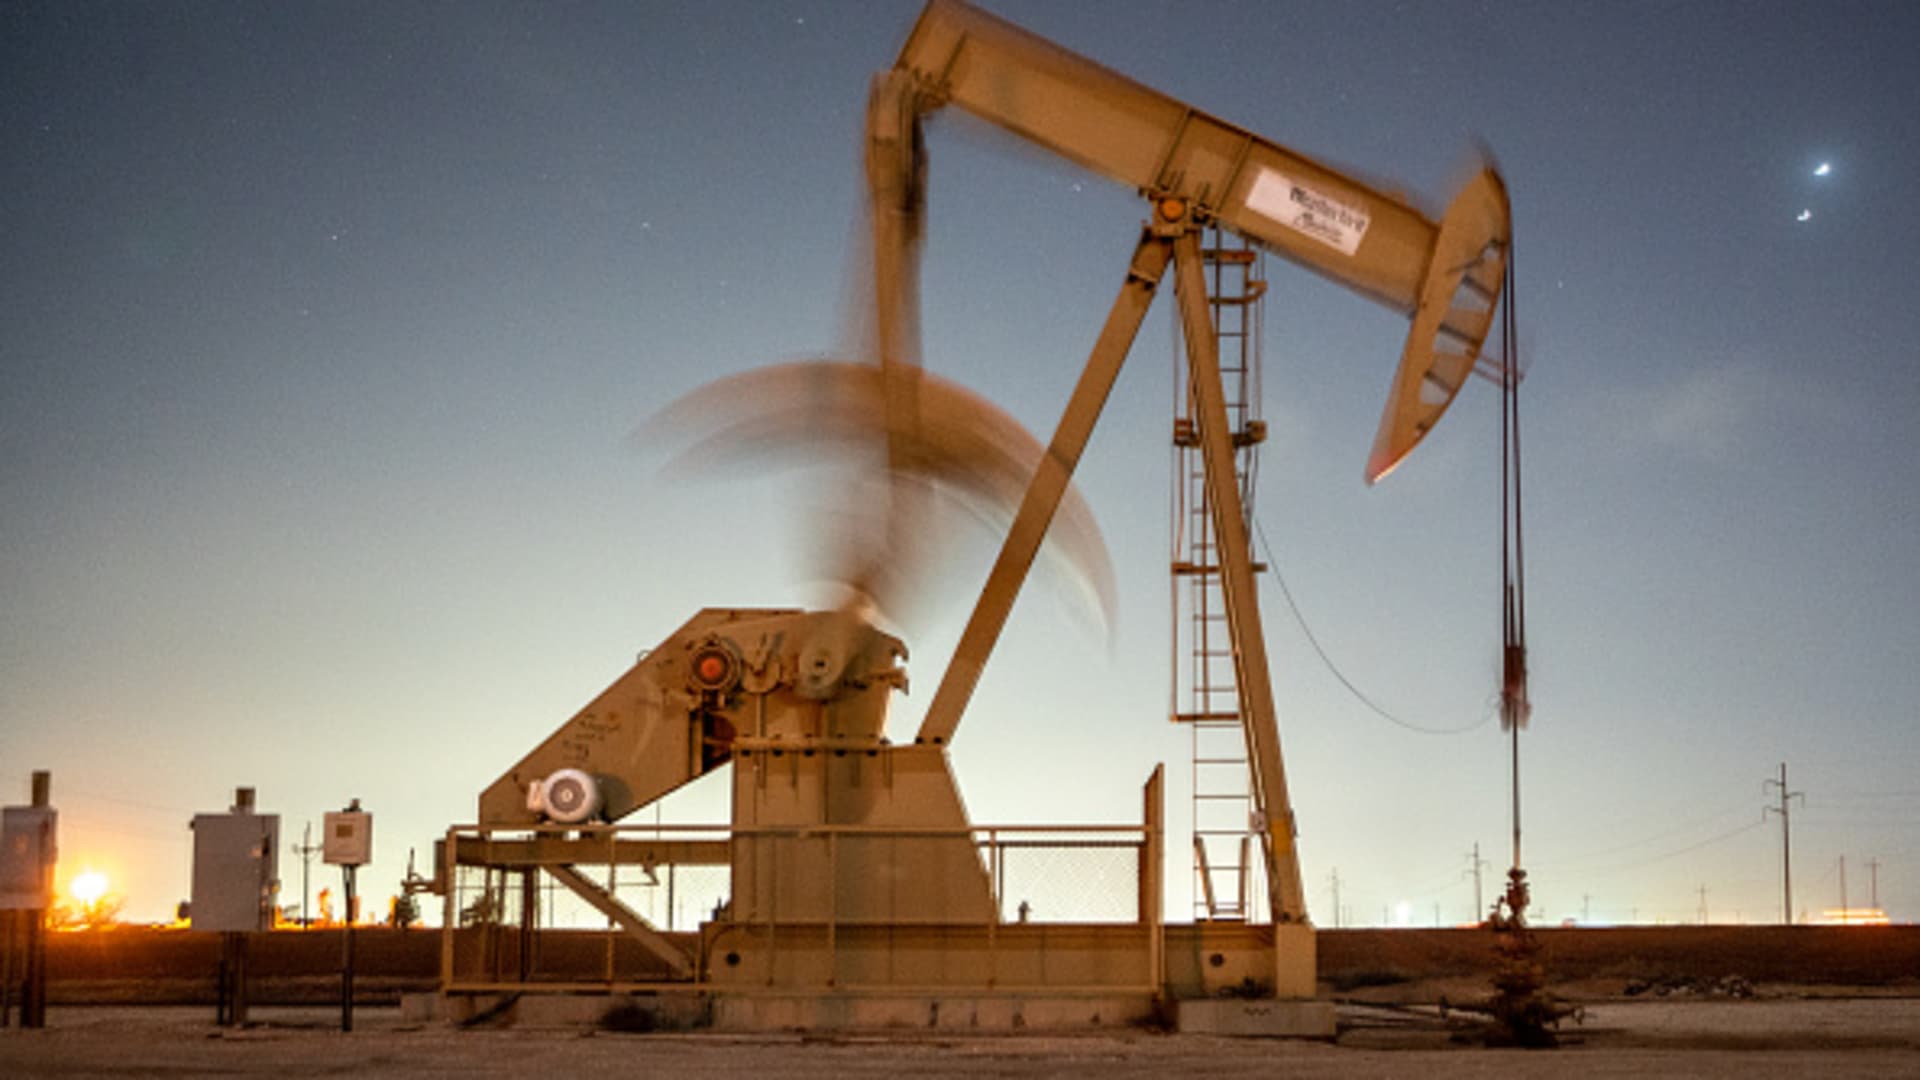 Jim Cramer sees more than 30% upside for this oil-and-gas stock [Video]